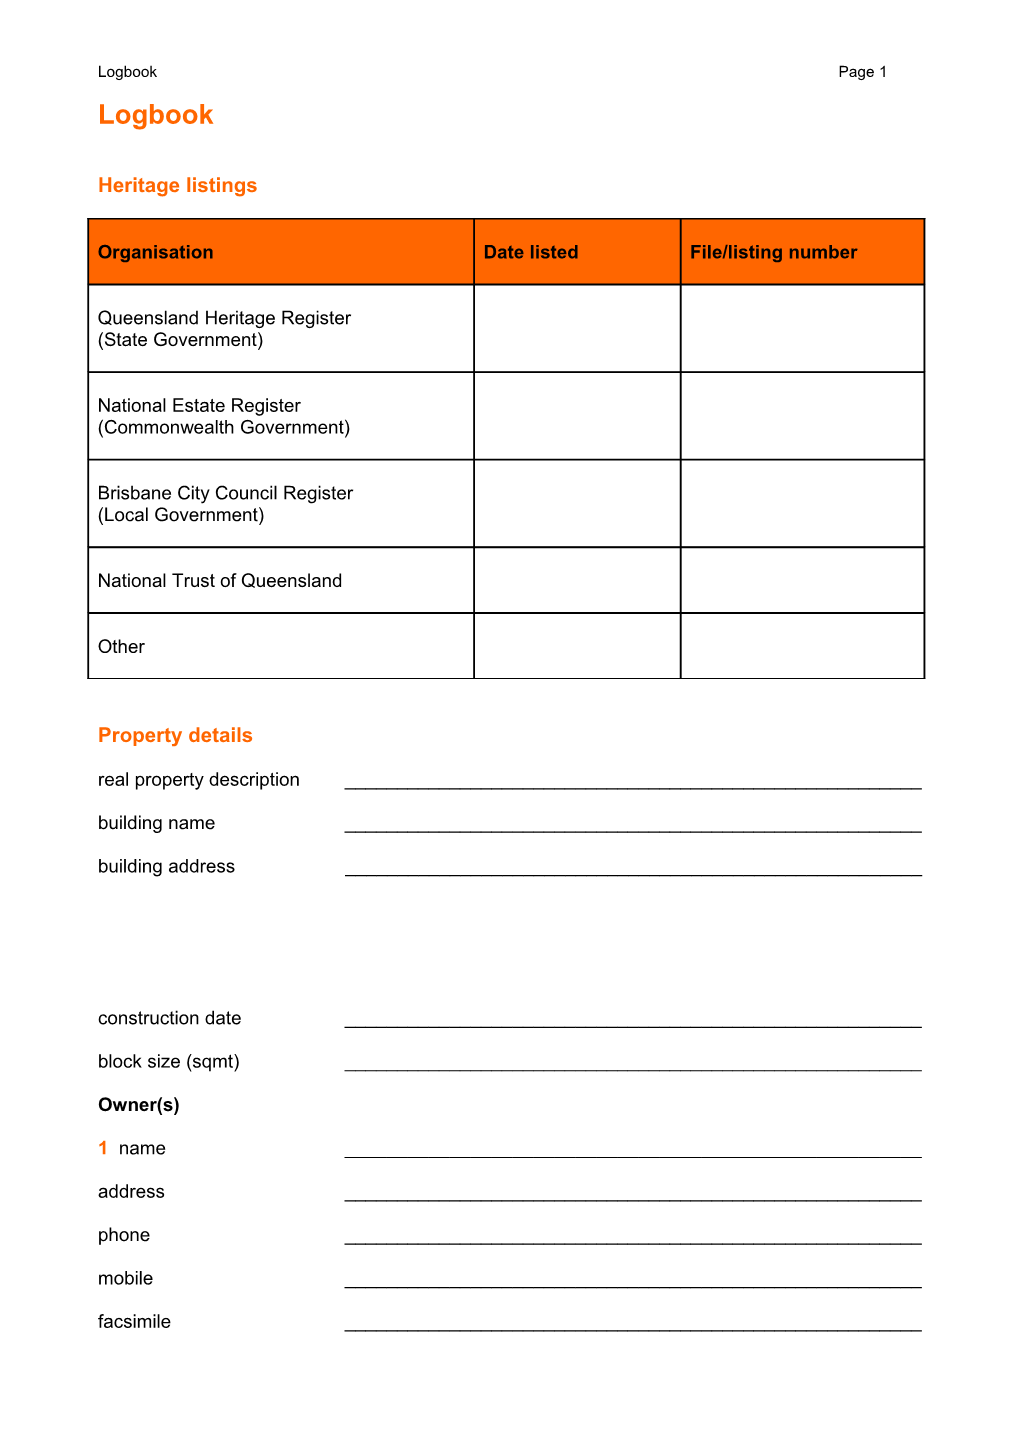 Check It: Logbook Sheets